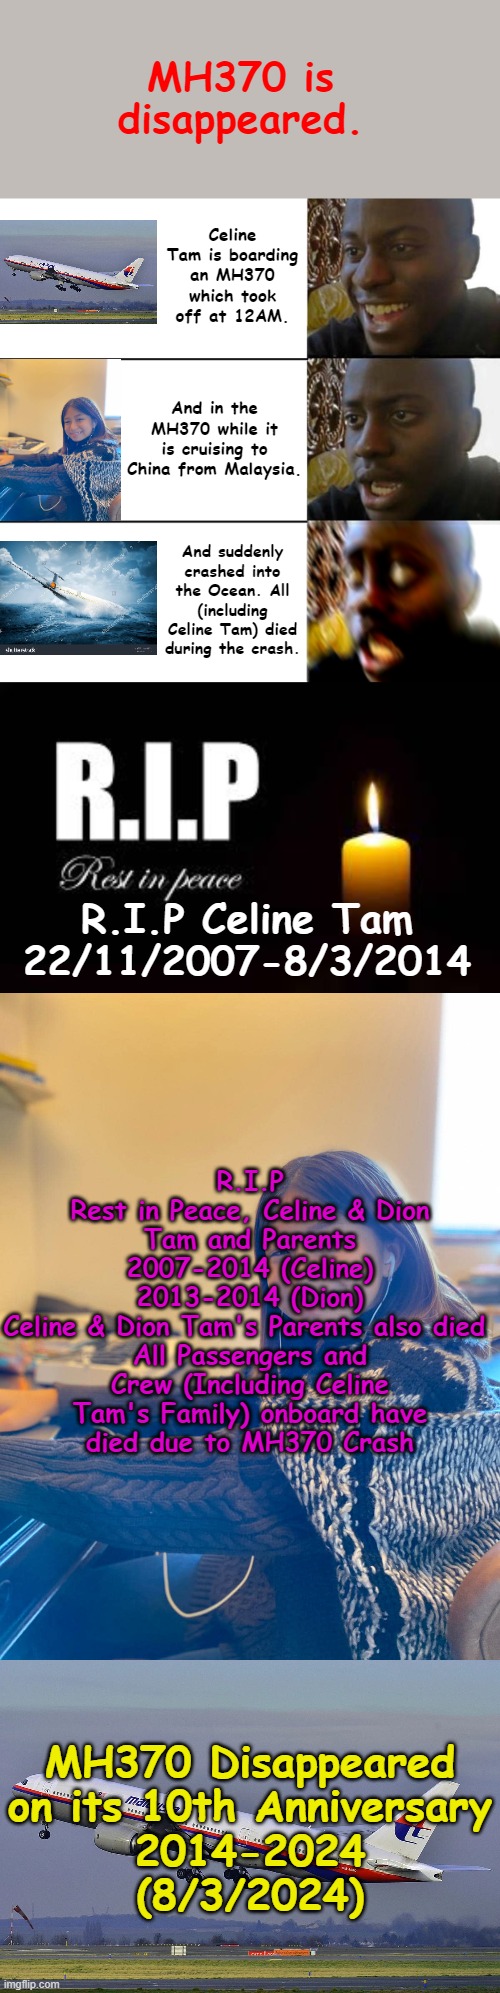 MH370 | MH370 is disappeared. Celine Tam is boarding an MH370 which took off at 12AM. And in the MH370 while it is cruising to China from Malaysia. And suddenly crashed into the Ocean. All (including Celine Tam) died during the crash. R.I.P Celine Tam
22/11/2007-8/3/2014; R.I.P
Rest in Peace, Celine & Dion Tam and Parents
2007-2014 (Celine)
2013-2014 (Dion)
Celine & Dion Tam's Parents also died 
All Passengers and Crew (Including Celine Tam's Family) onboard have
died due to MH370 Crash; MH370 Disappeared
on its 10th Anniversary
2014-2024
(8/3/2024) | image tagged in disappointed guy 3 panels | made w/ Imgflip meme maker